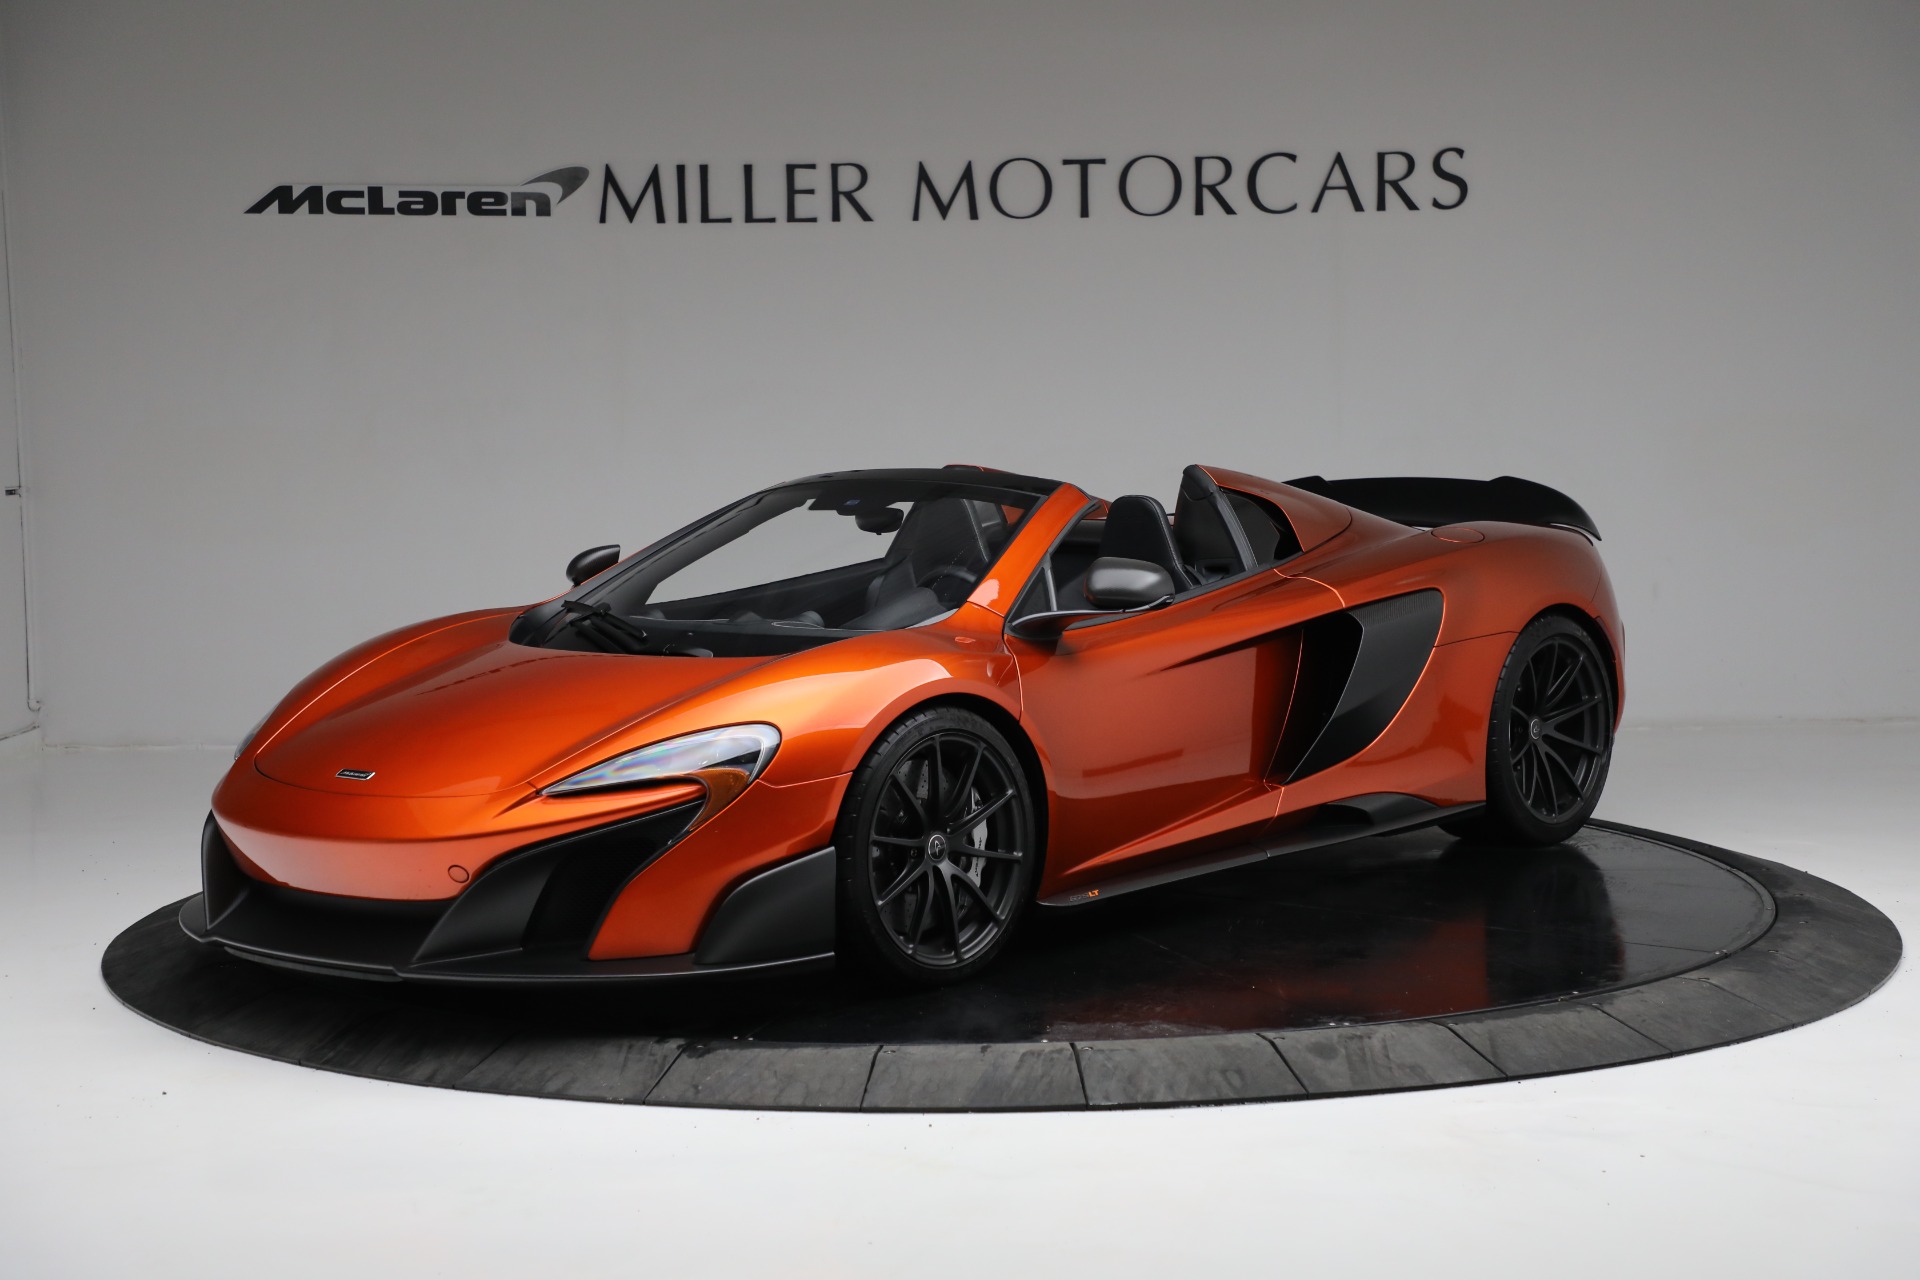 Used 2016 McLaren 675LT Spider for sale $335,900 at Rolls-Royce Motor Cars Greenwich in Greenwich CT 06830 1